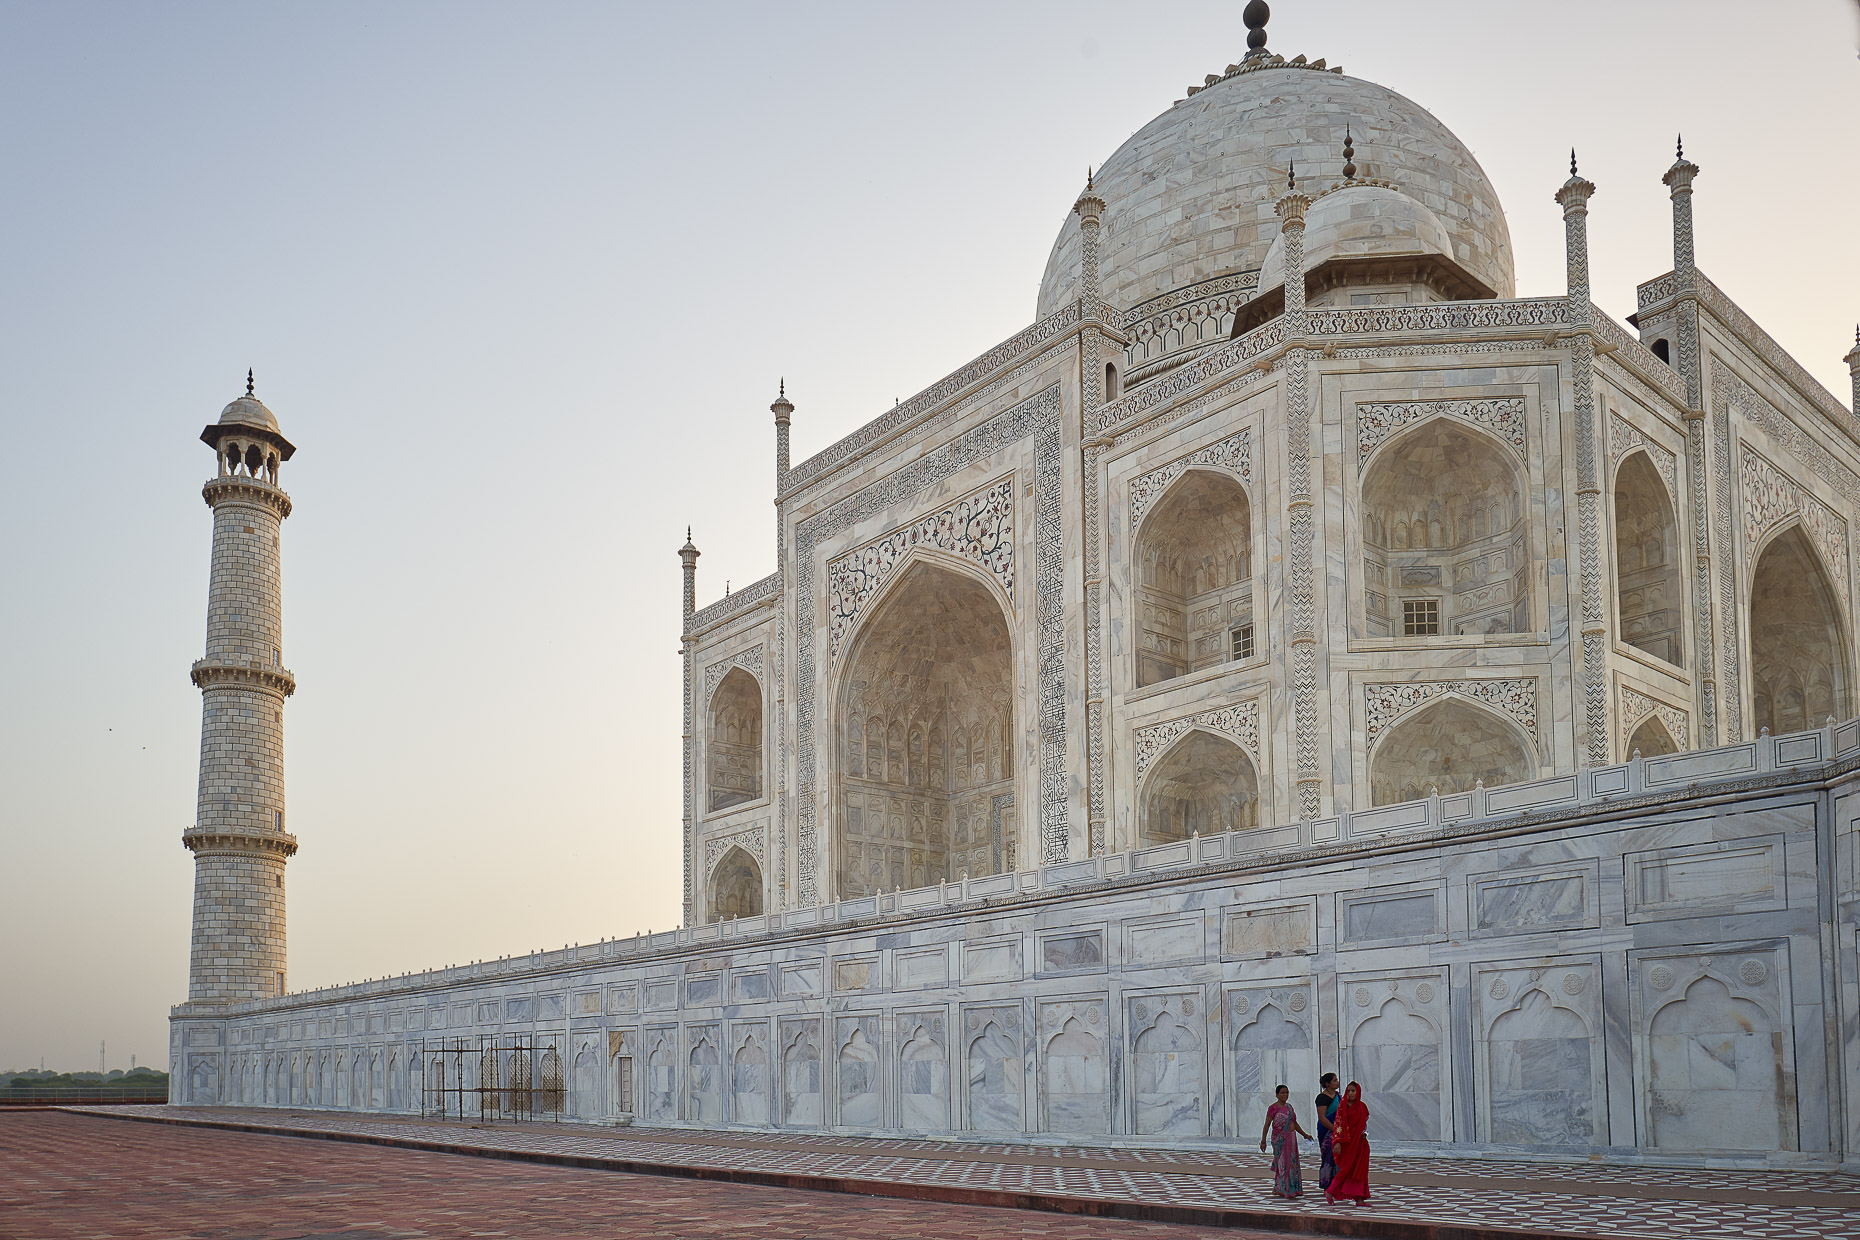 Personal_India_Agra_L10508881-26